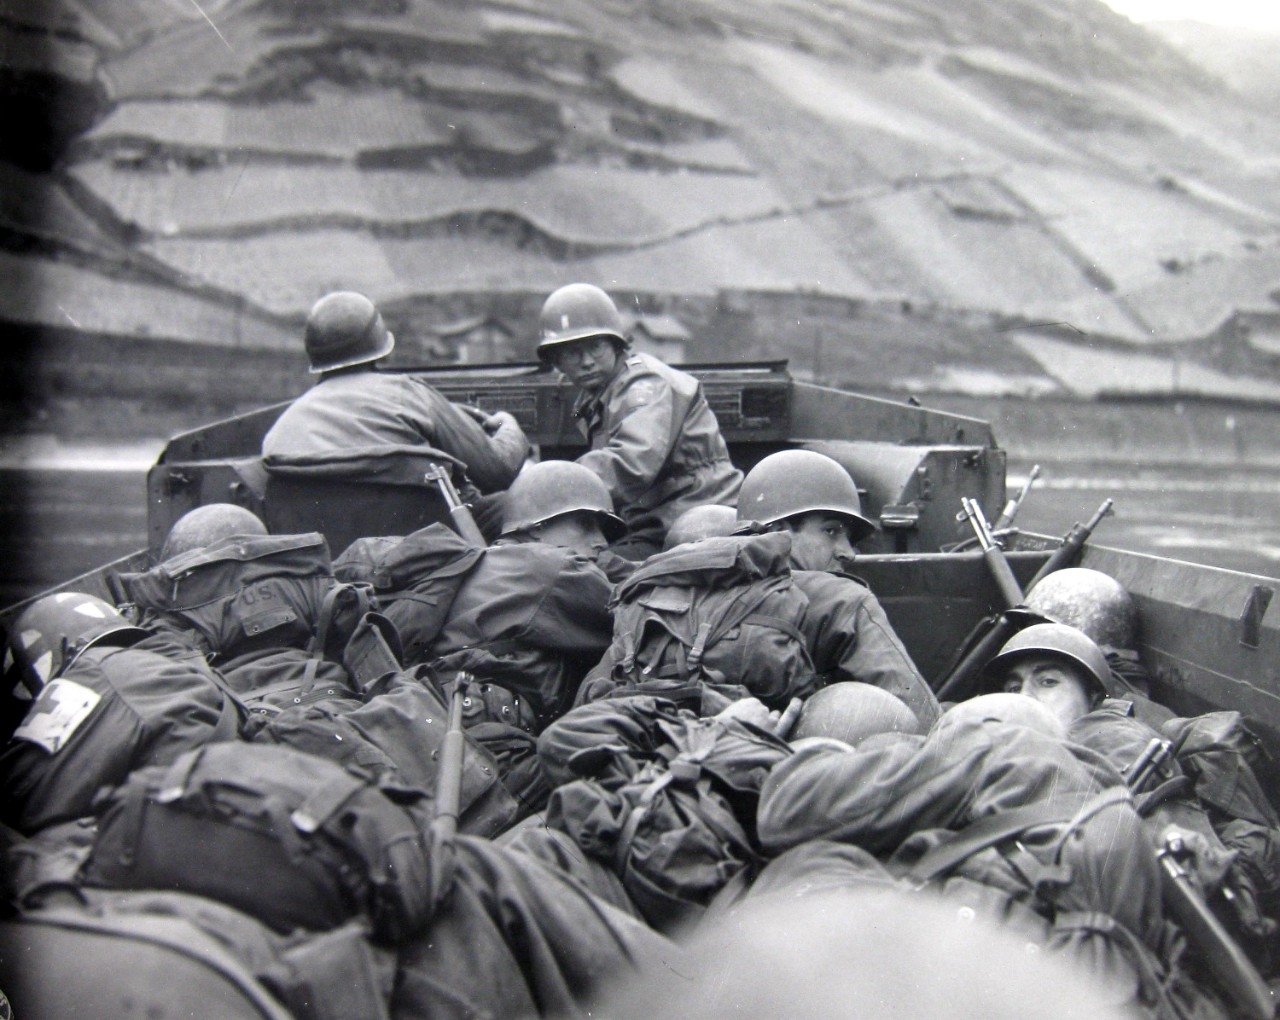 Crouching low for concealment and protection in a DUKW amphibious vehicle, men of the 89th Division, U.S. Third Army, cross the Rhine River at Oberwesel, Germany.